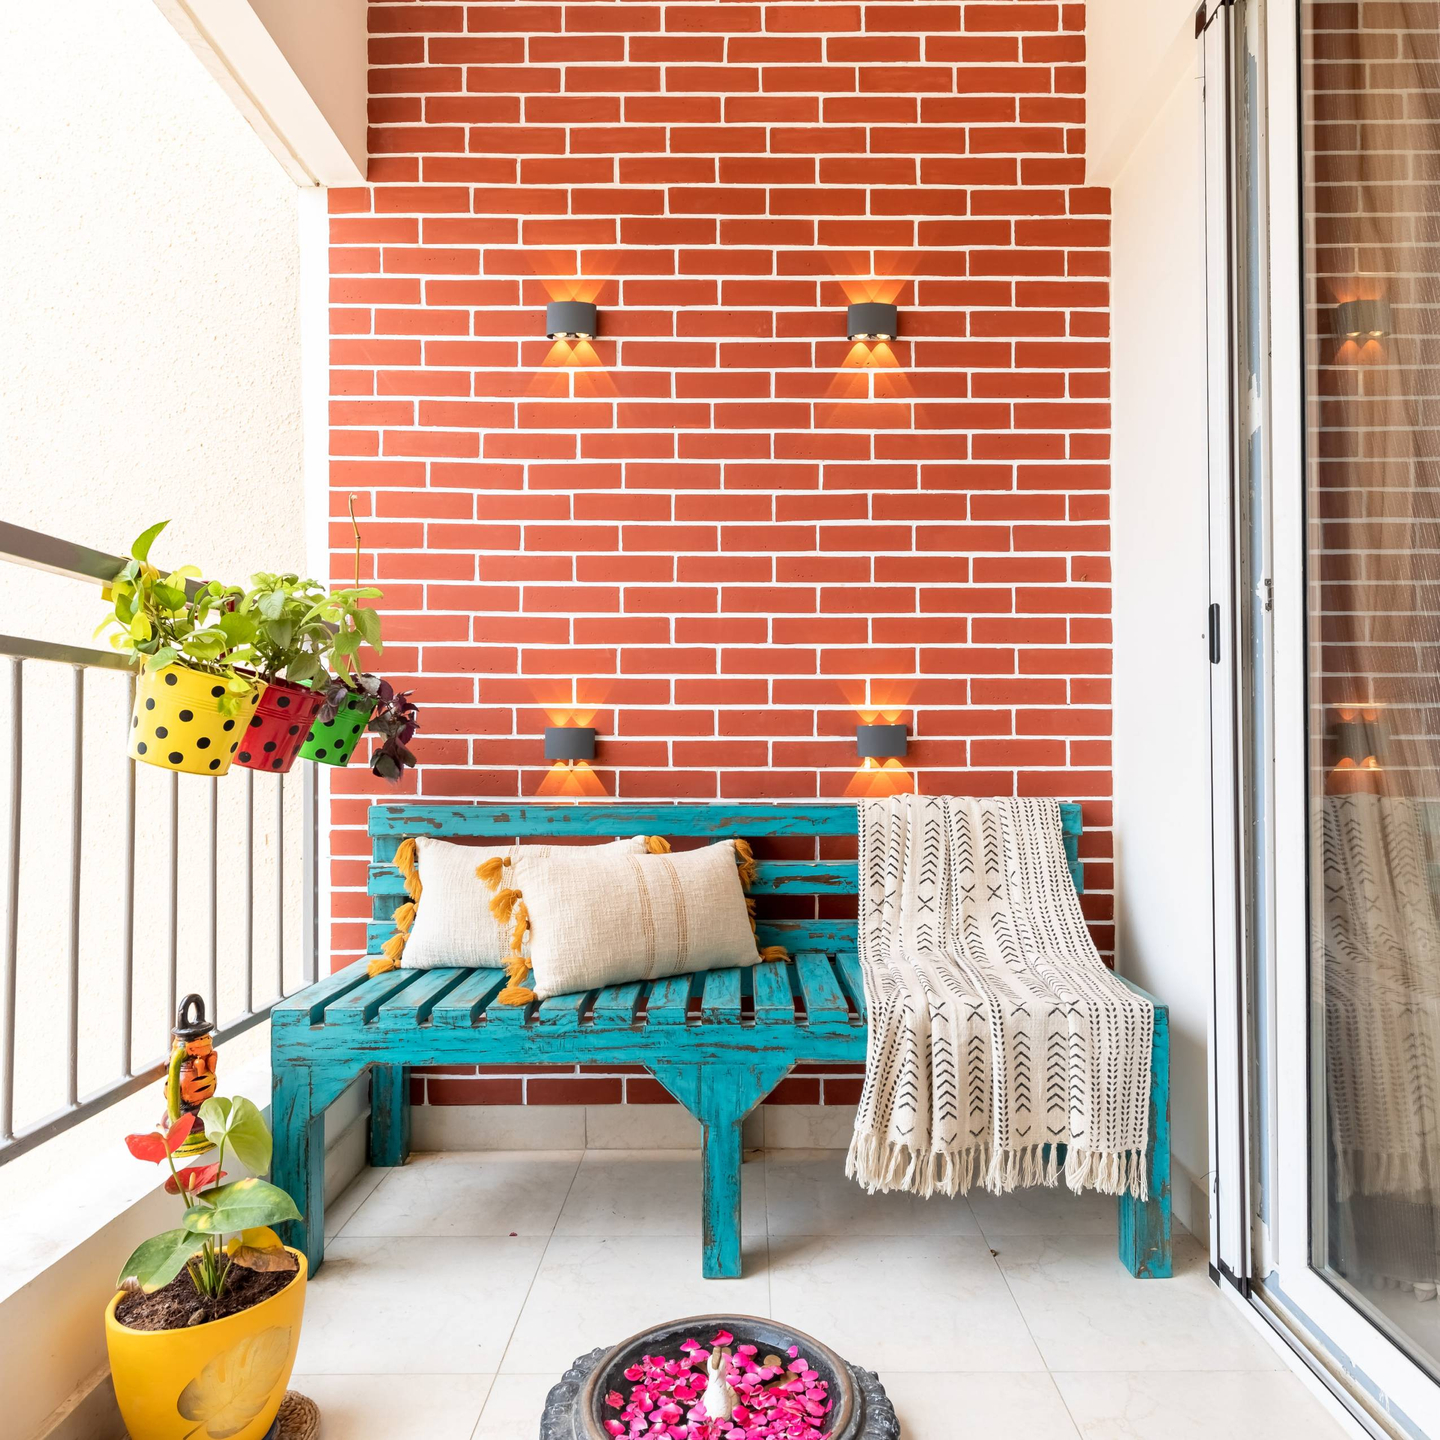 Balcony Design With Brick-Patterned Wall And Wall Lights - Livspace